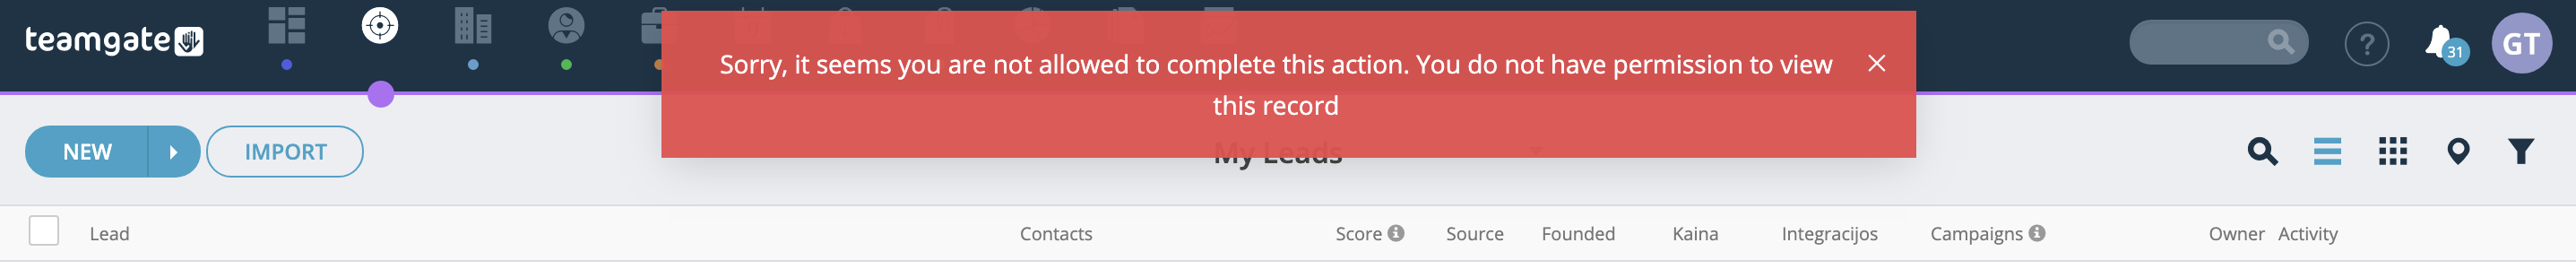 notification-cannot-see-record-Teamgate-CRM.png